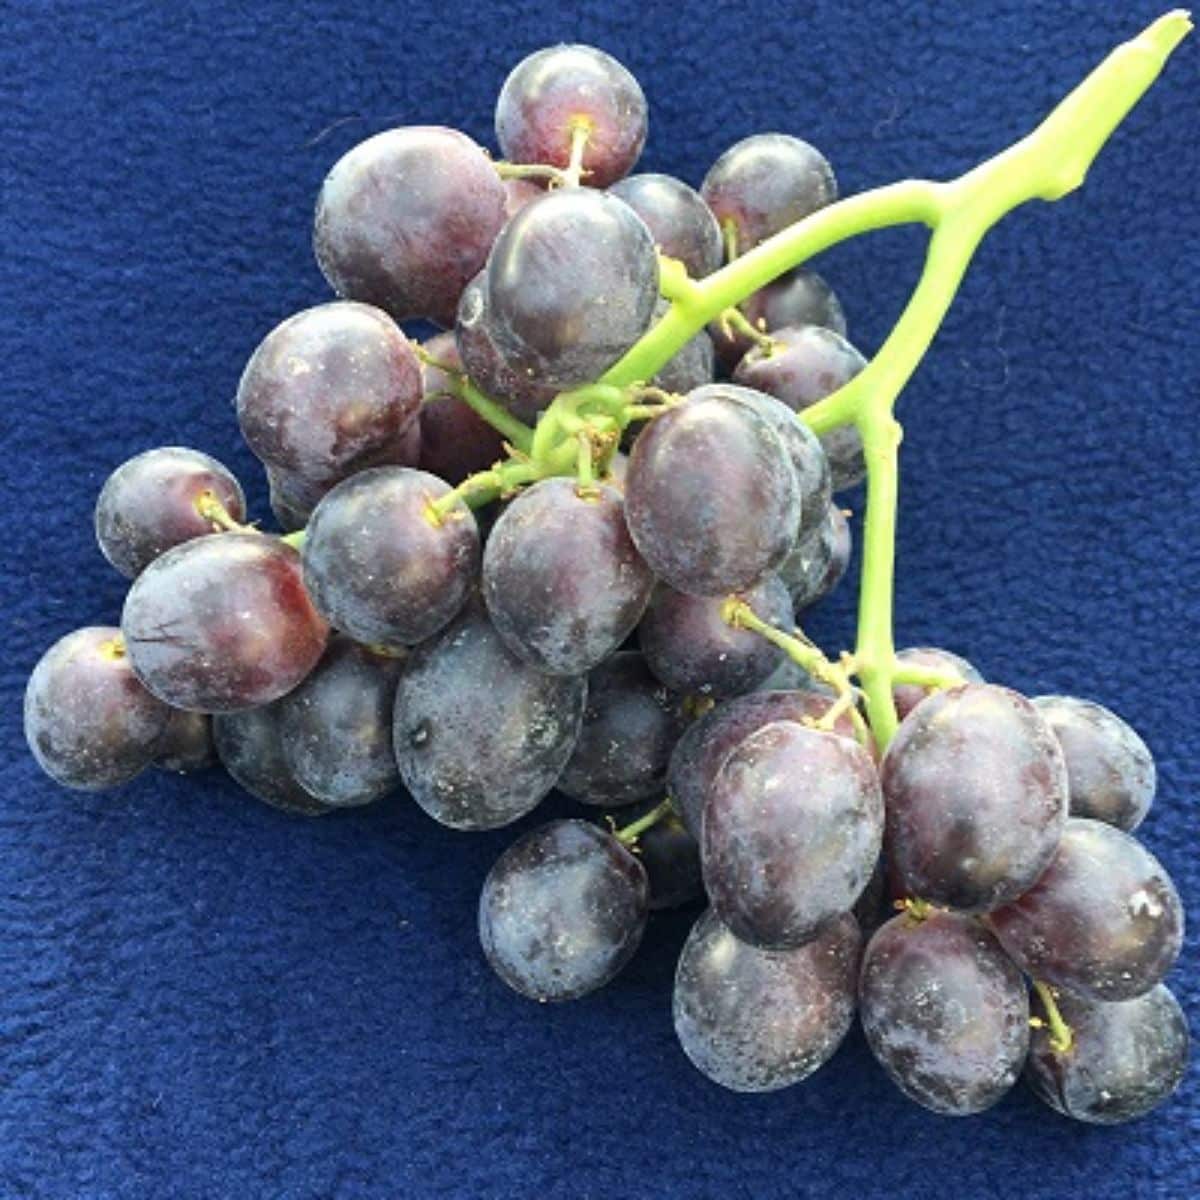 A cluster of a ripe Candy Dreams grape variety.